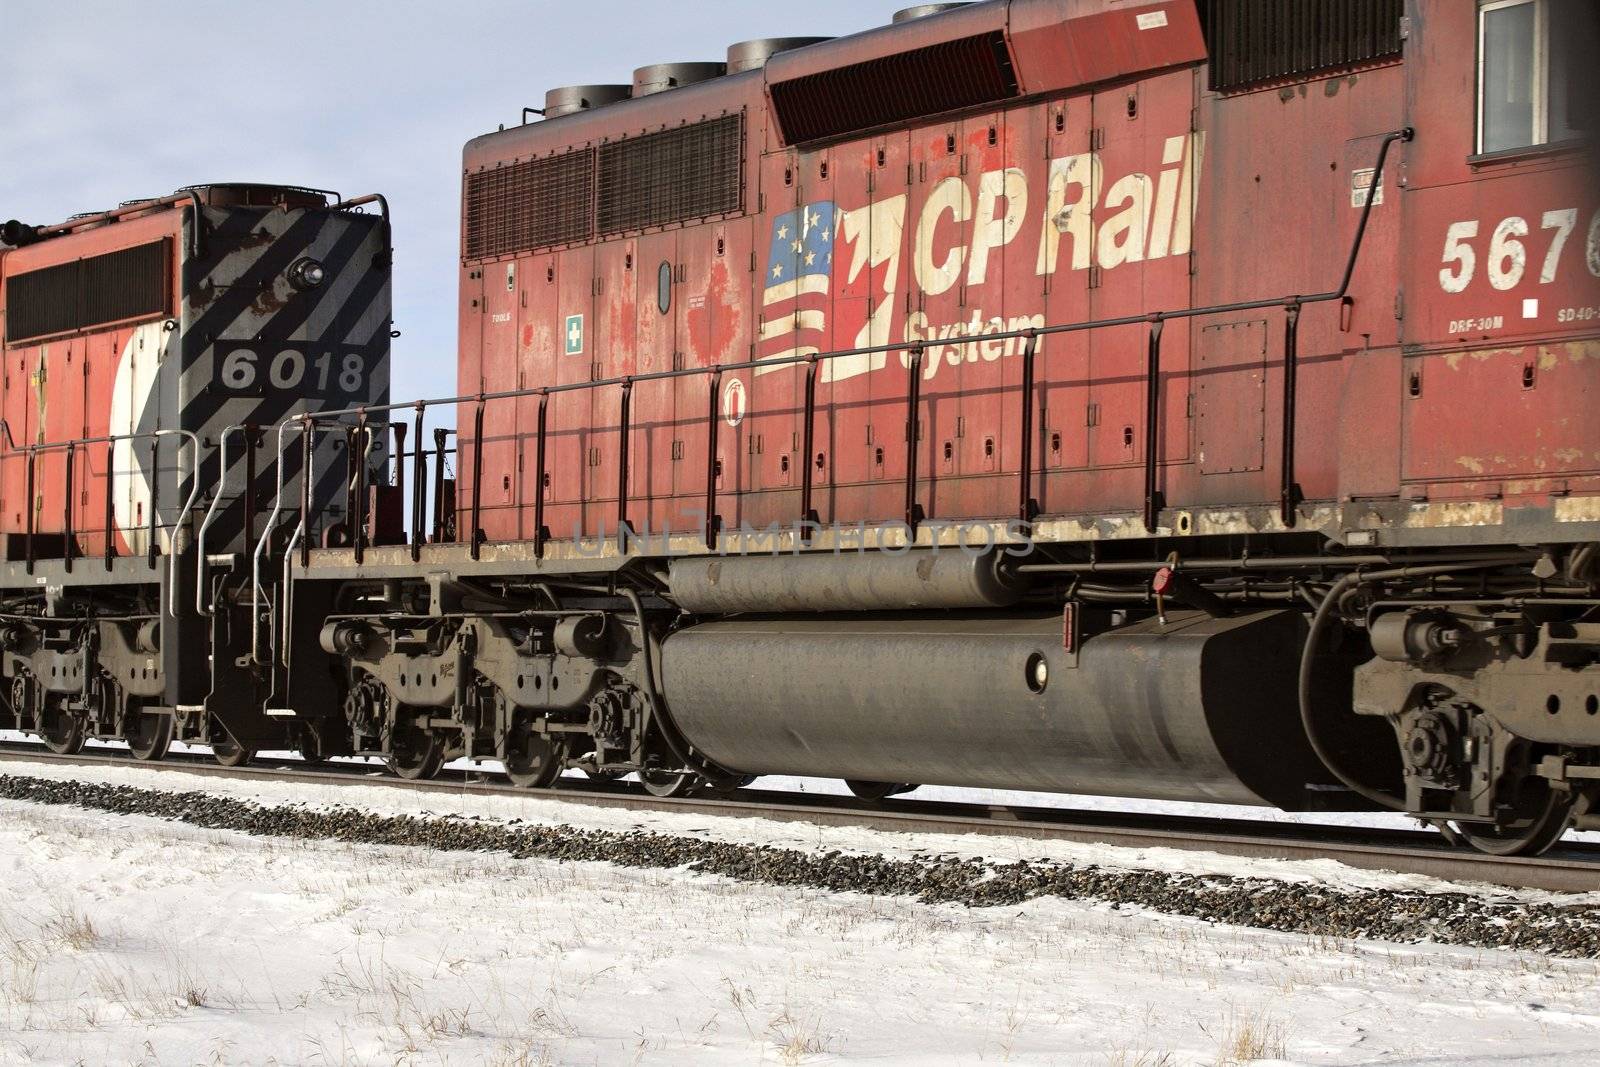 Train engines of CPRail in winter by pictureguy